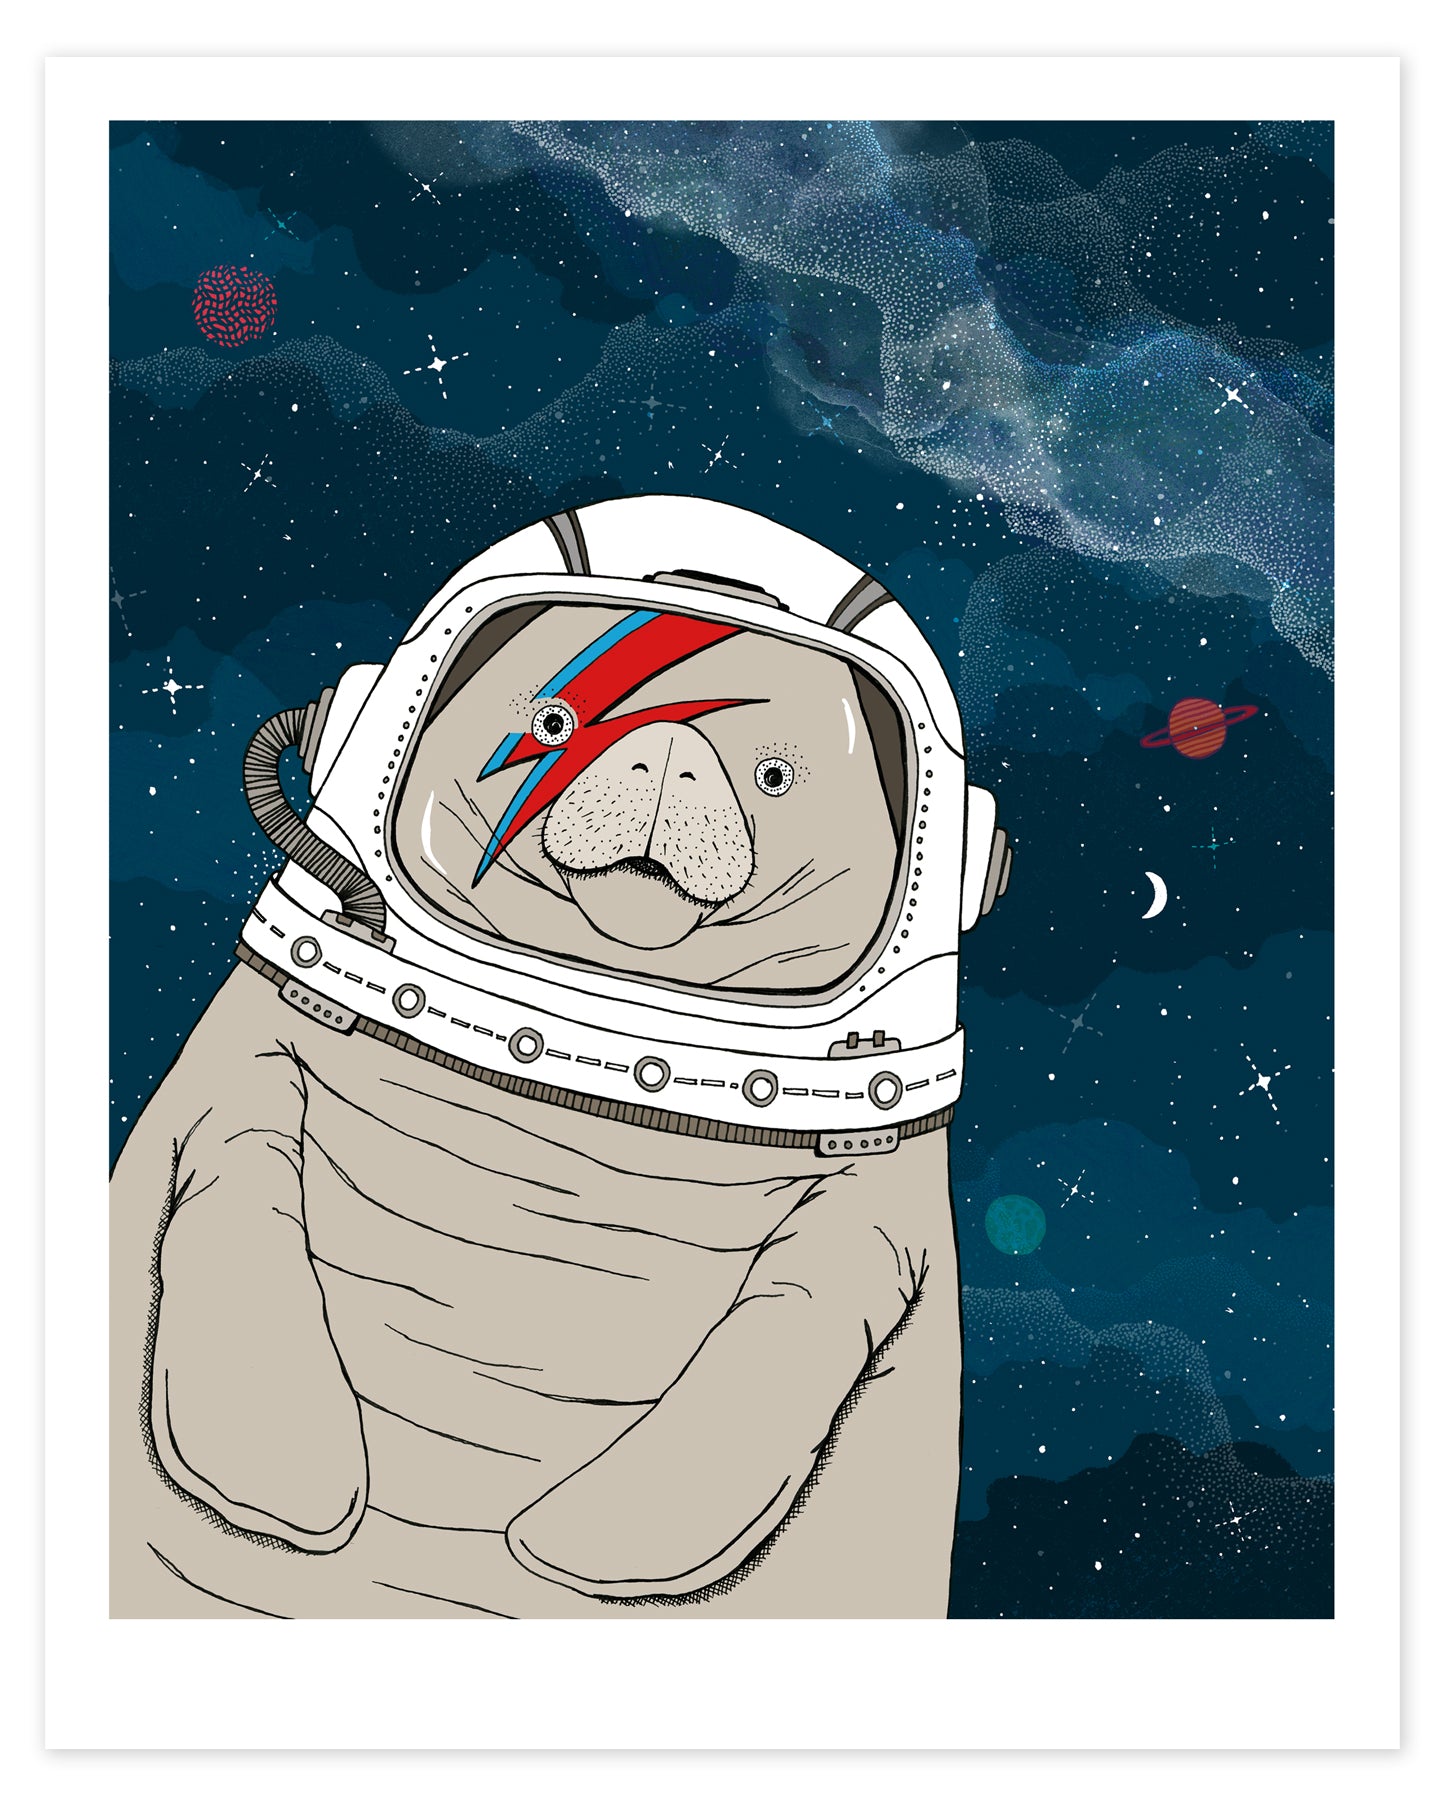 A hand-drawn illustration of a manatee floating in space, wearing an astronaut's helmet with a red and blue lightning bolt over one eye like the iconic image of David Bowie on his Aladdin Sane album cover. 